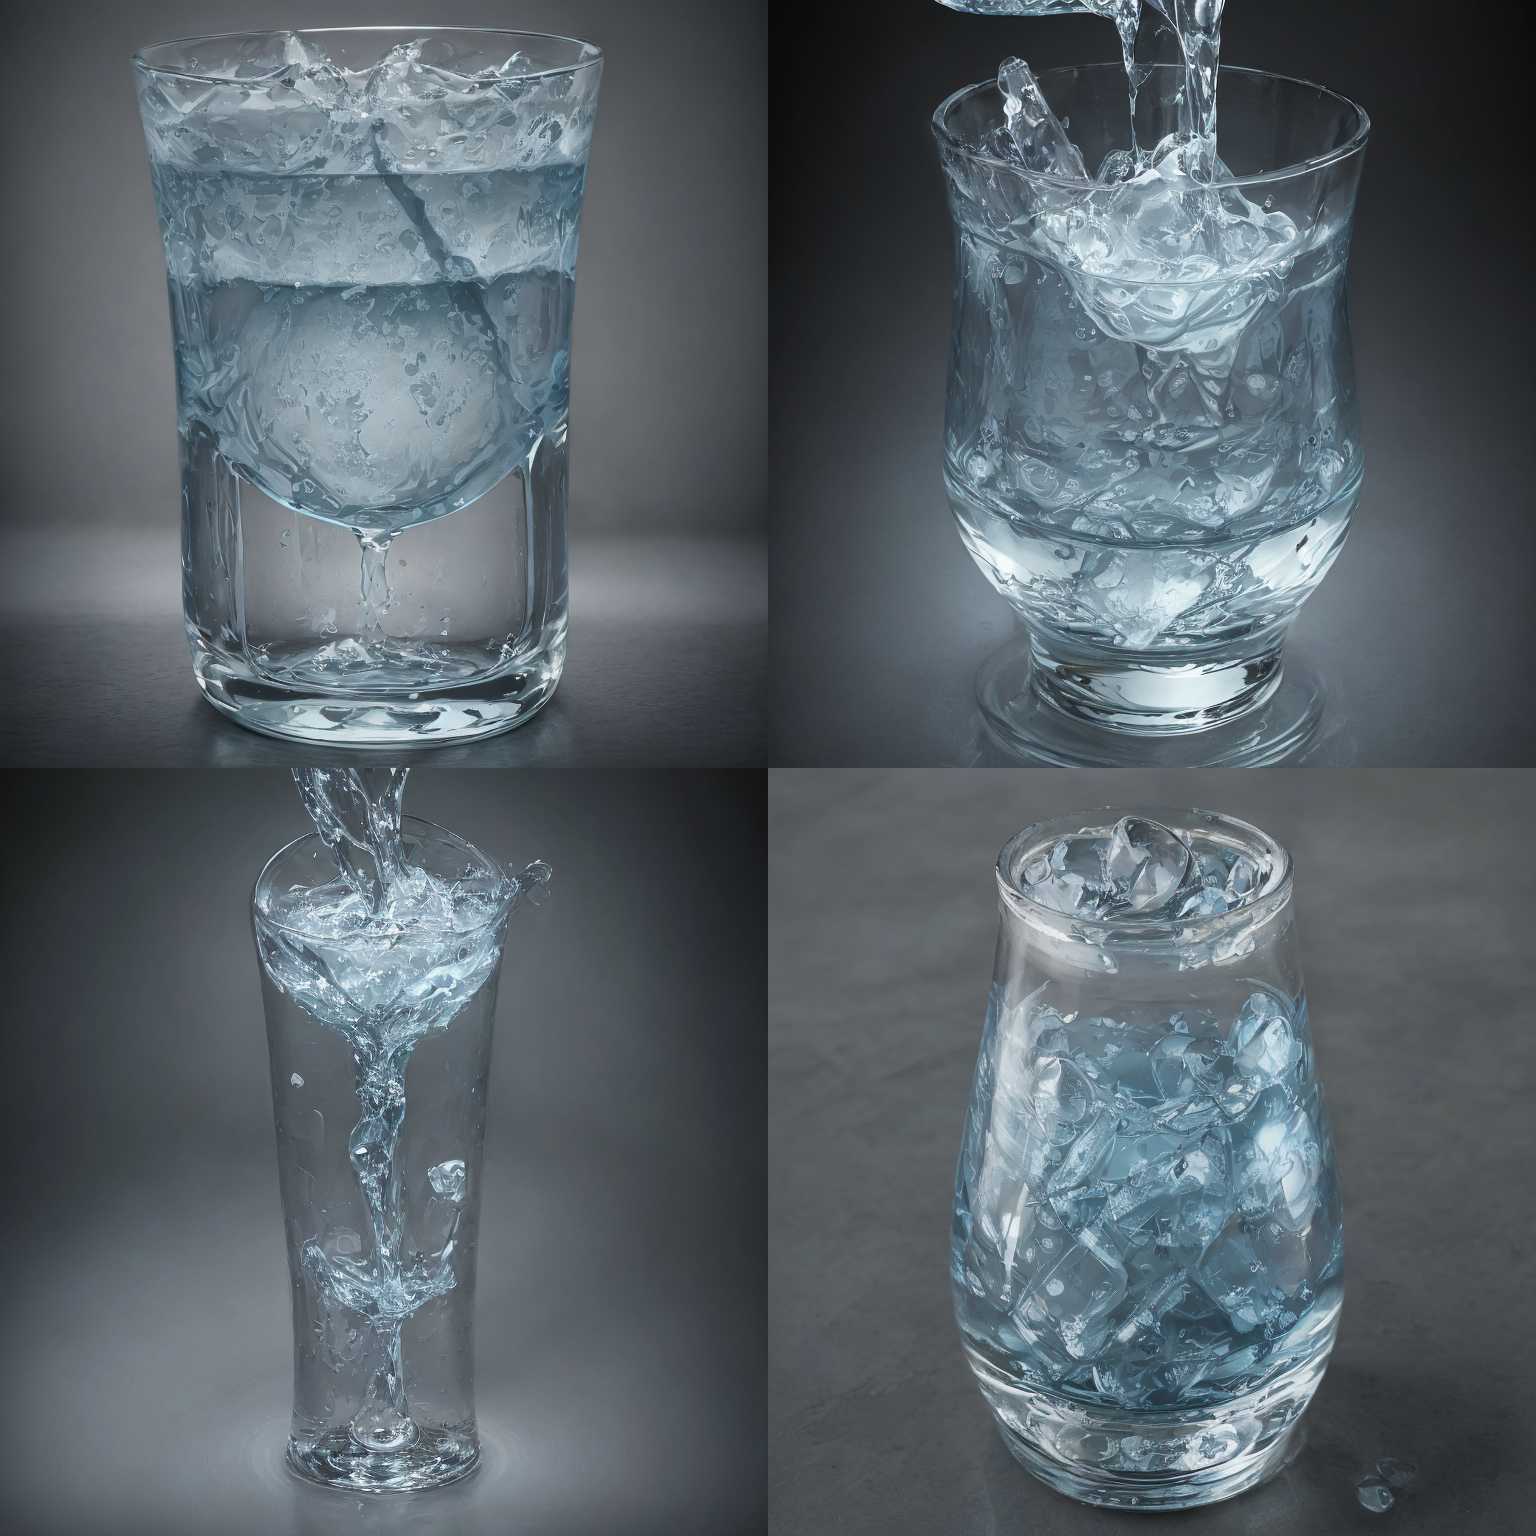 A glass of water held upside-down